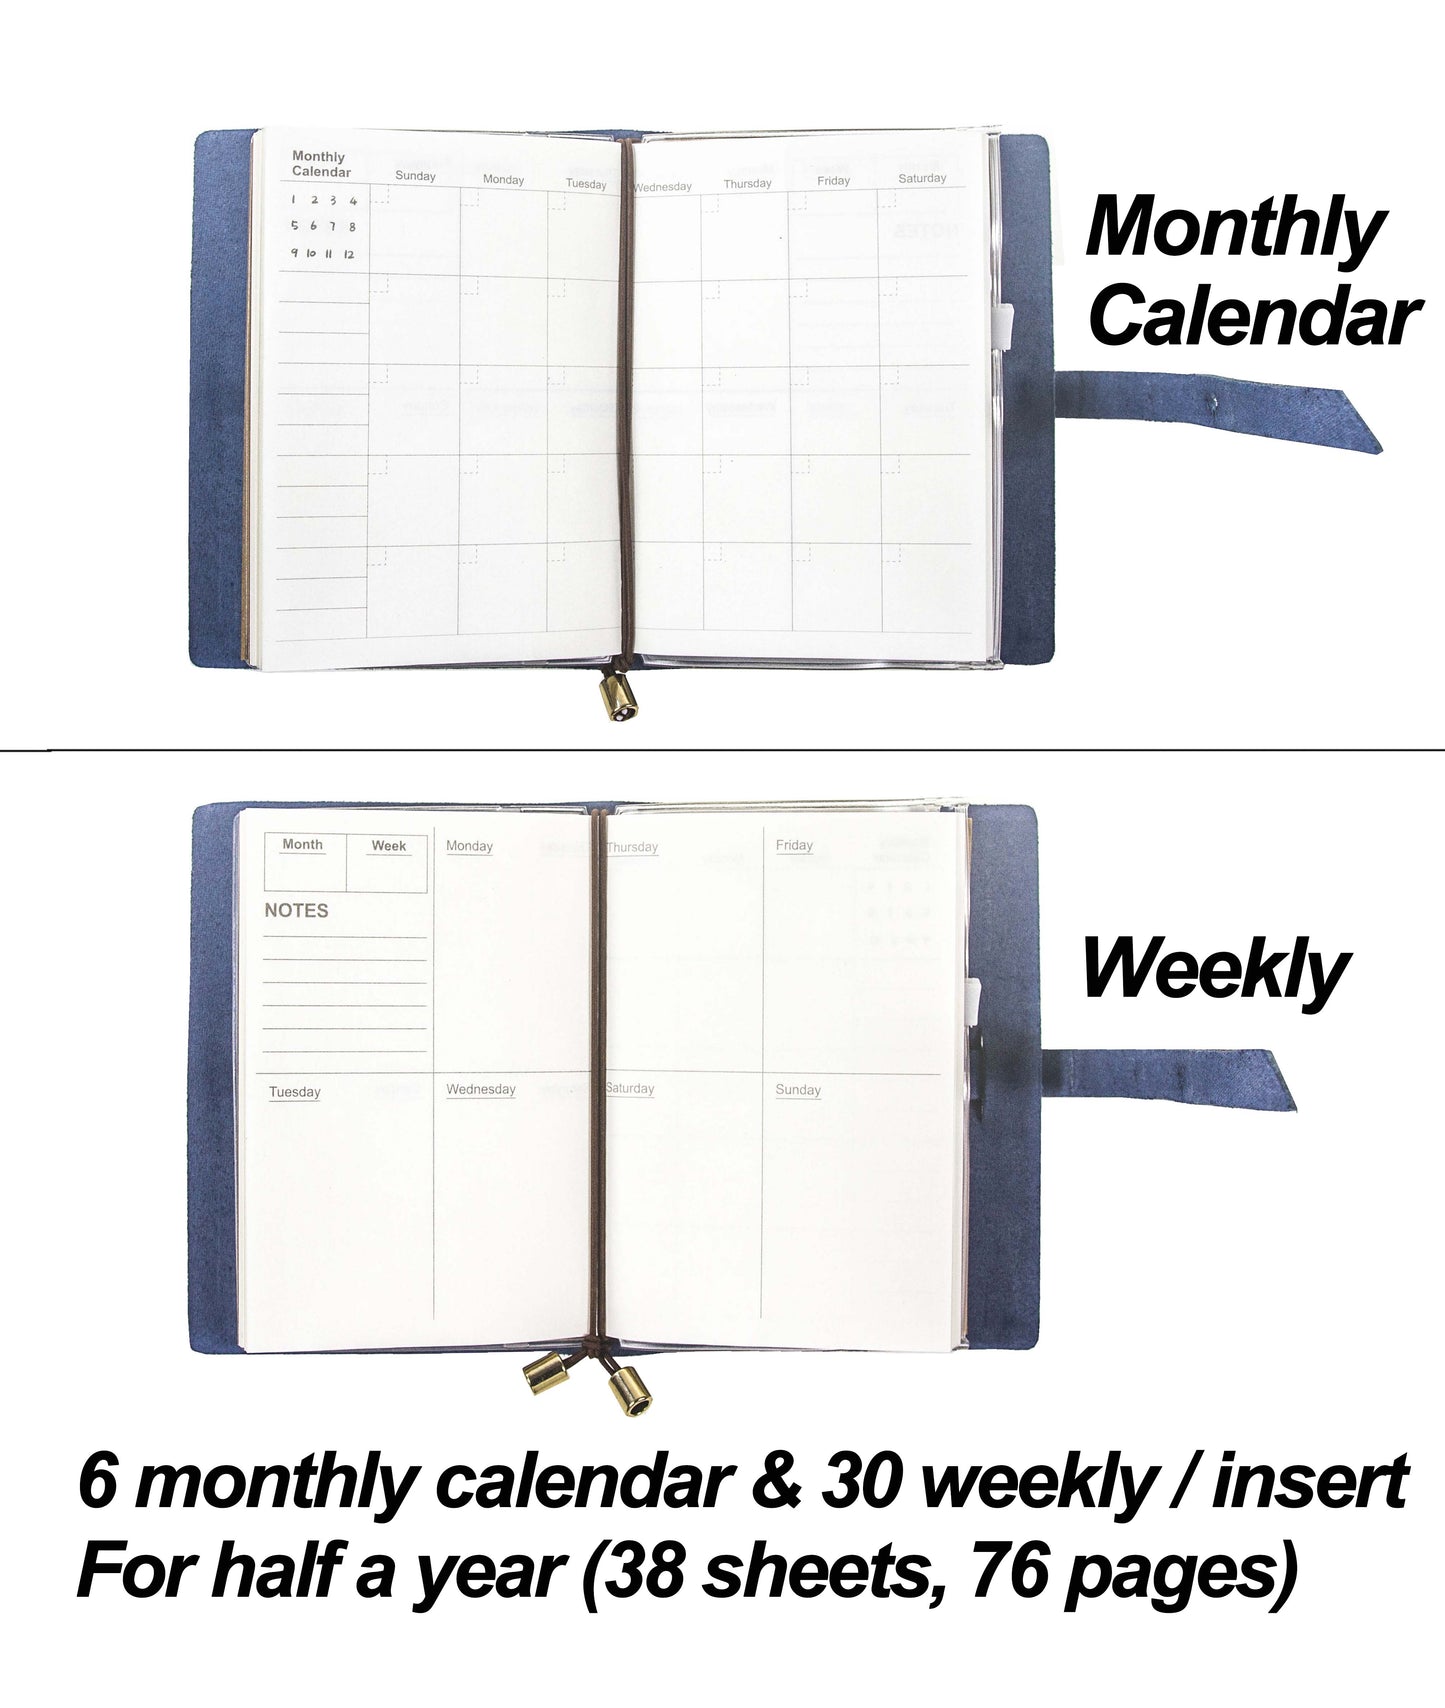 [Planner-Small] Leather Journal Planner Organizer - Academic Monthly Calendar & Weekly & Daily Blue